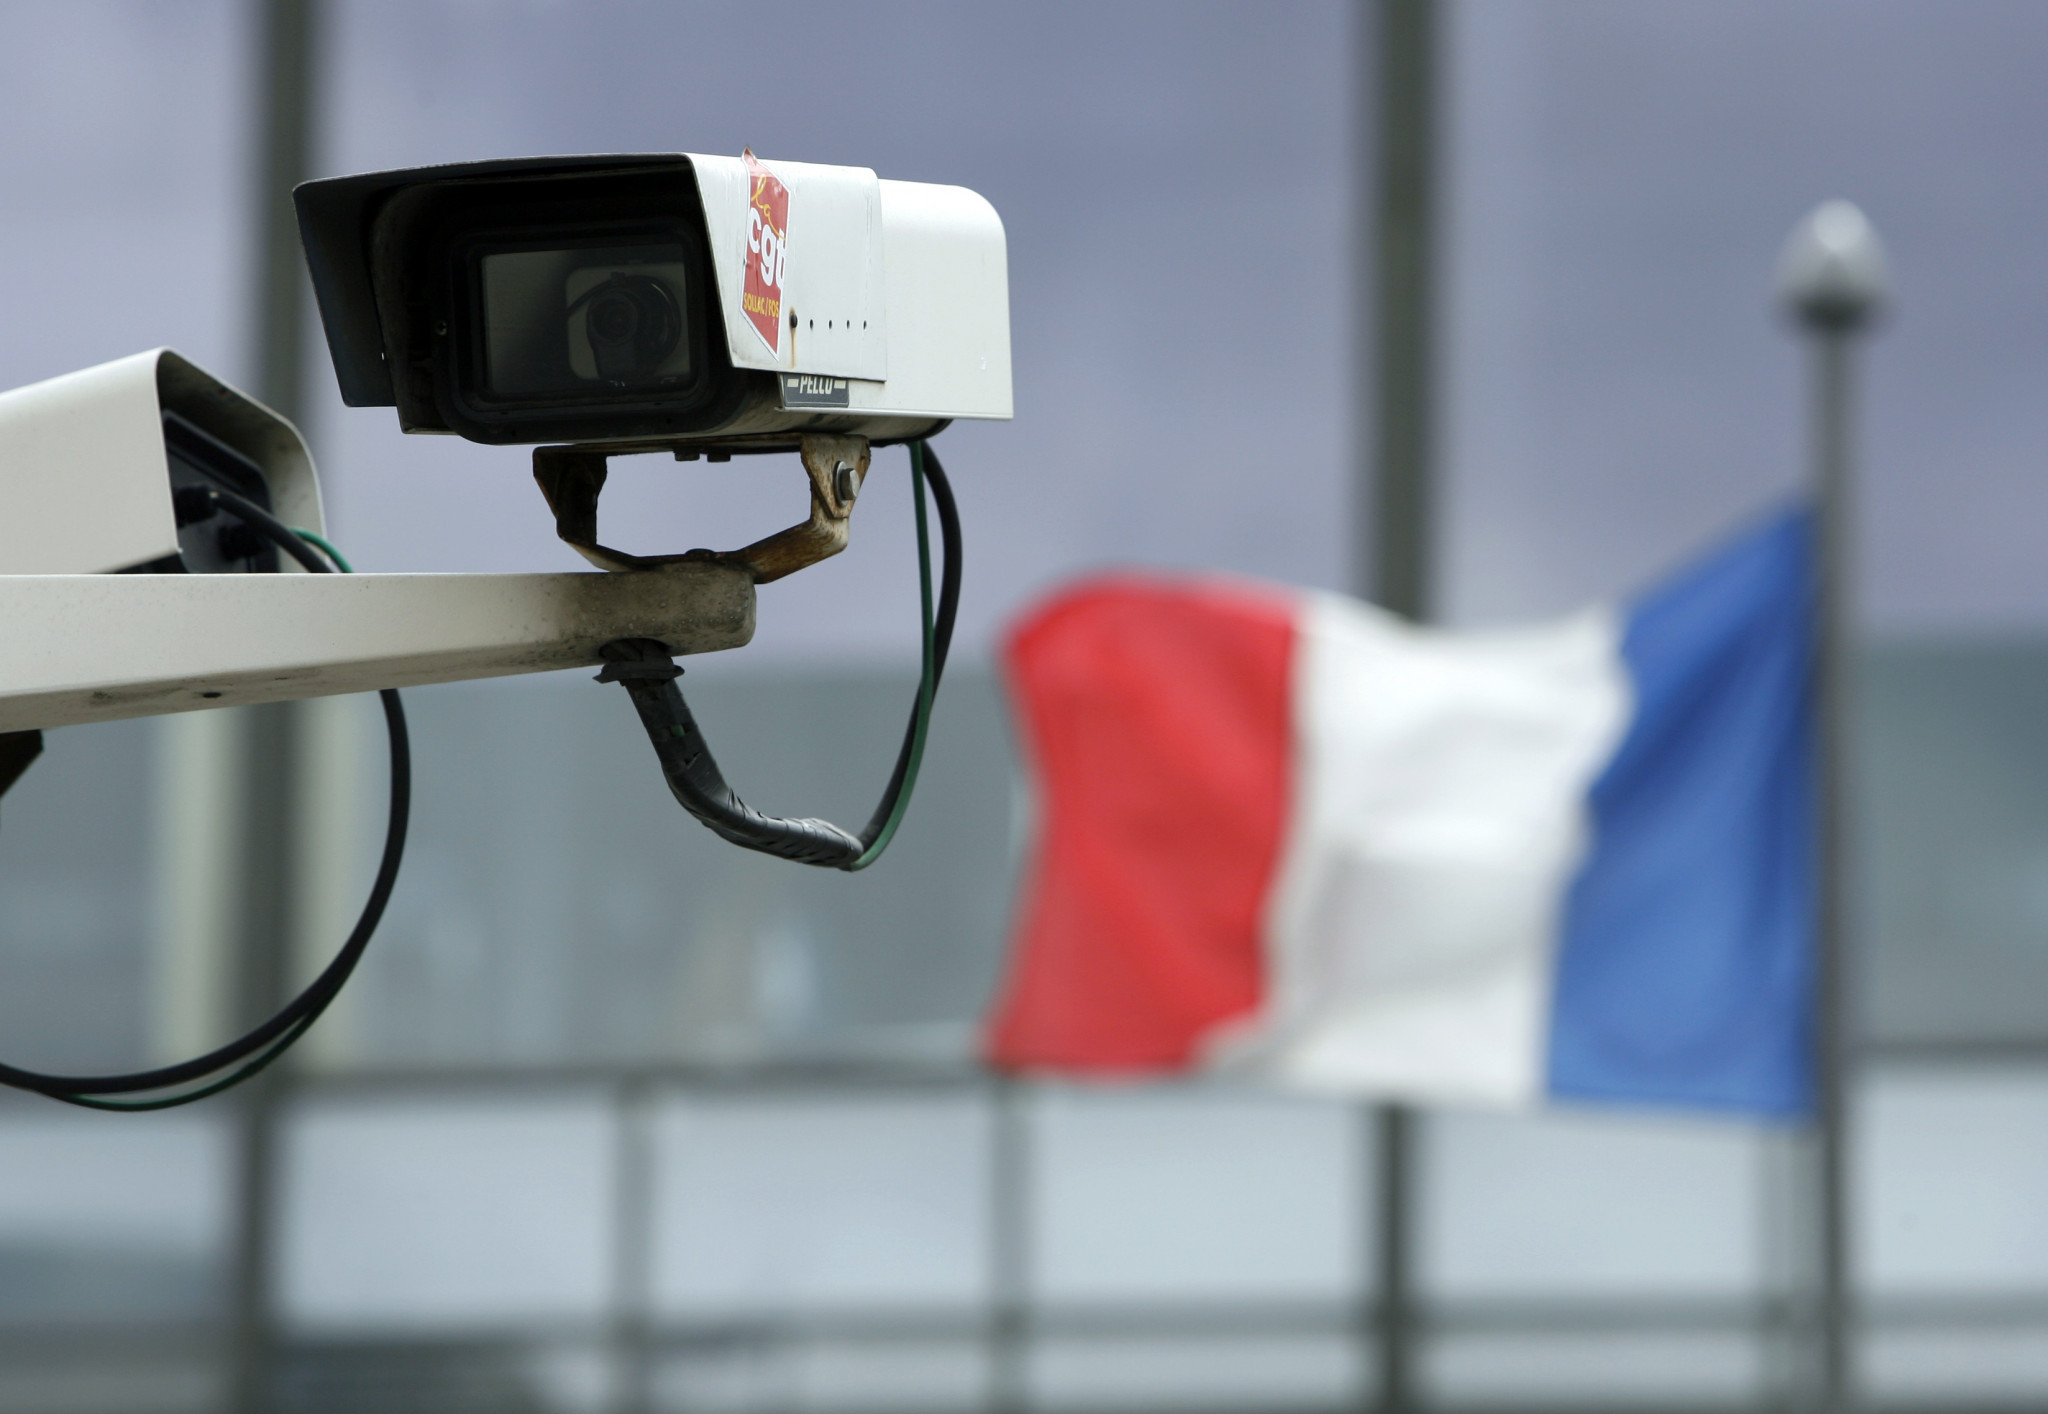 A total of 38 organisations have written to the French National Assembly urging it not to pass a surveillance law for Paris 2024 ©Getty Images